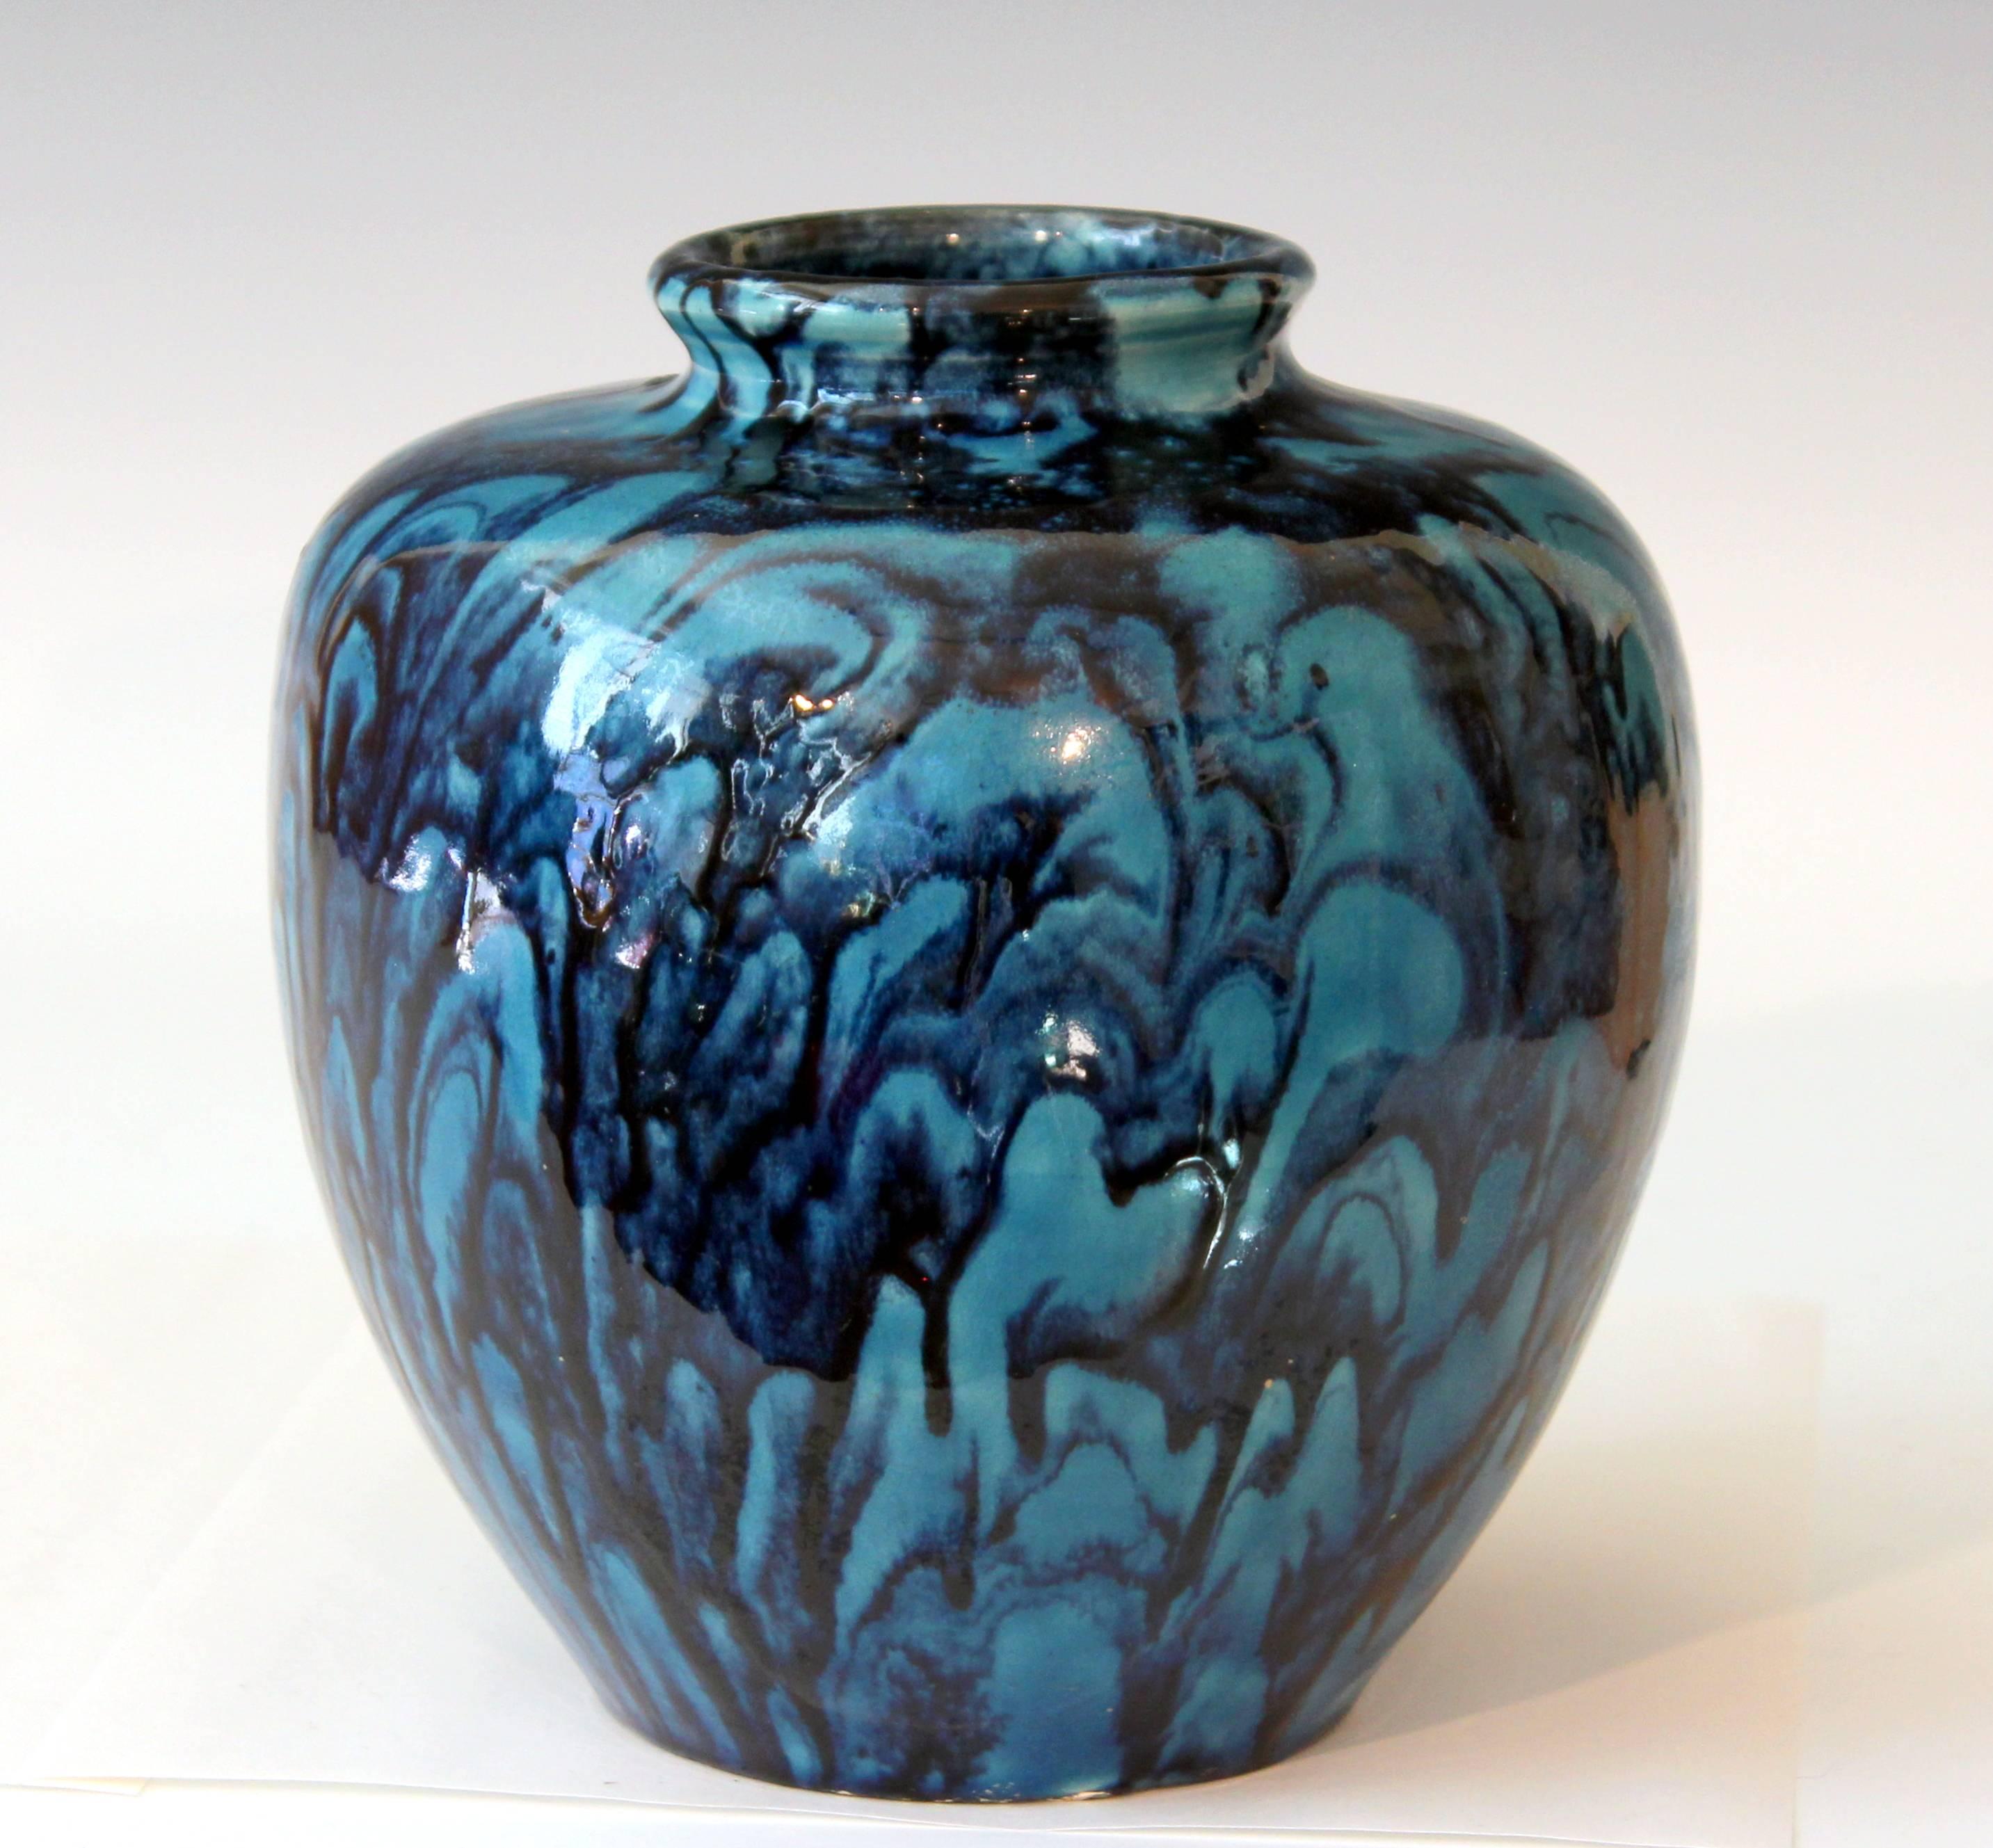 Awaji Pottery vase or jar with dark indigo blue drips over a mottled turquoise ground, circa 1930. Measures: 7 1/2